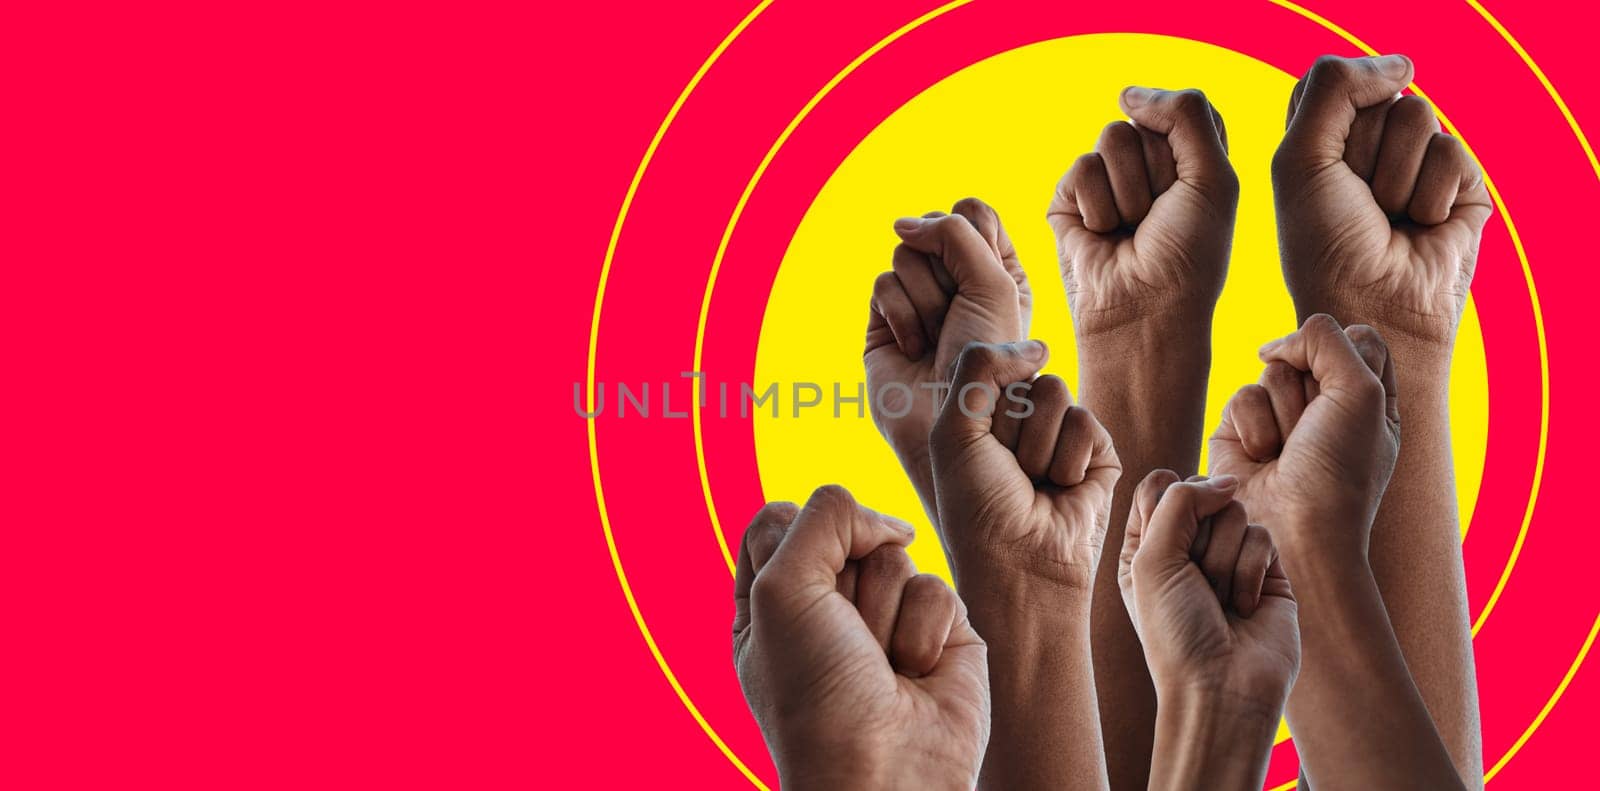 Fist, group and protest with art by red background for human rights, power and solidarity for equality. People, support and together with hands in air for motivation, goal or mockup space for opinion.